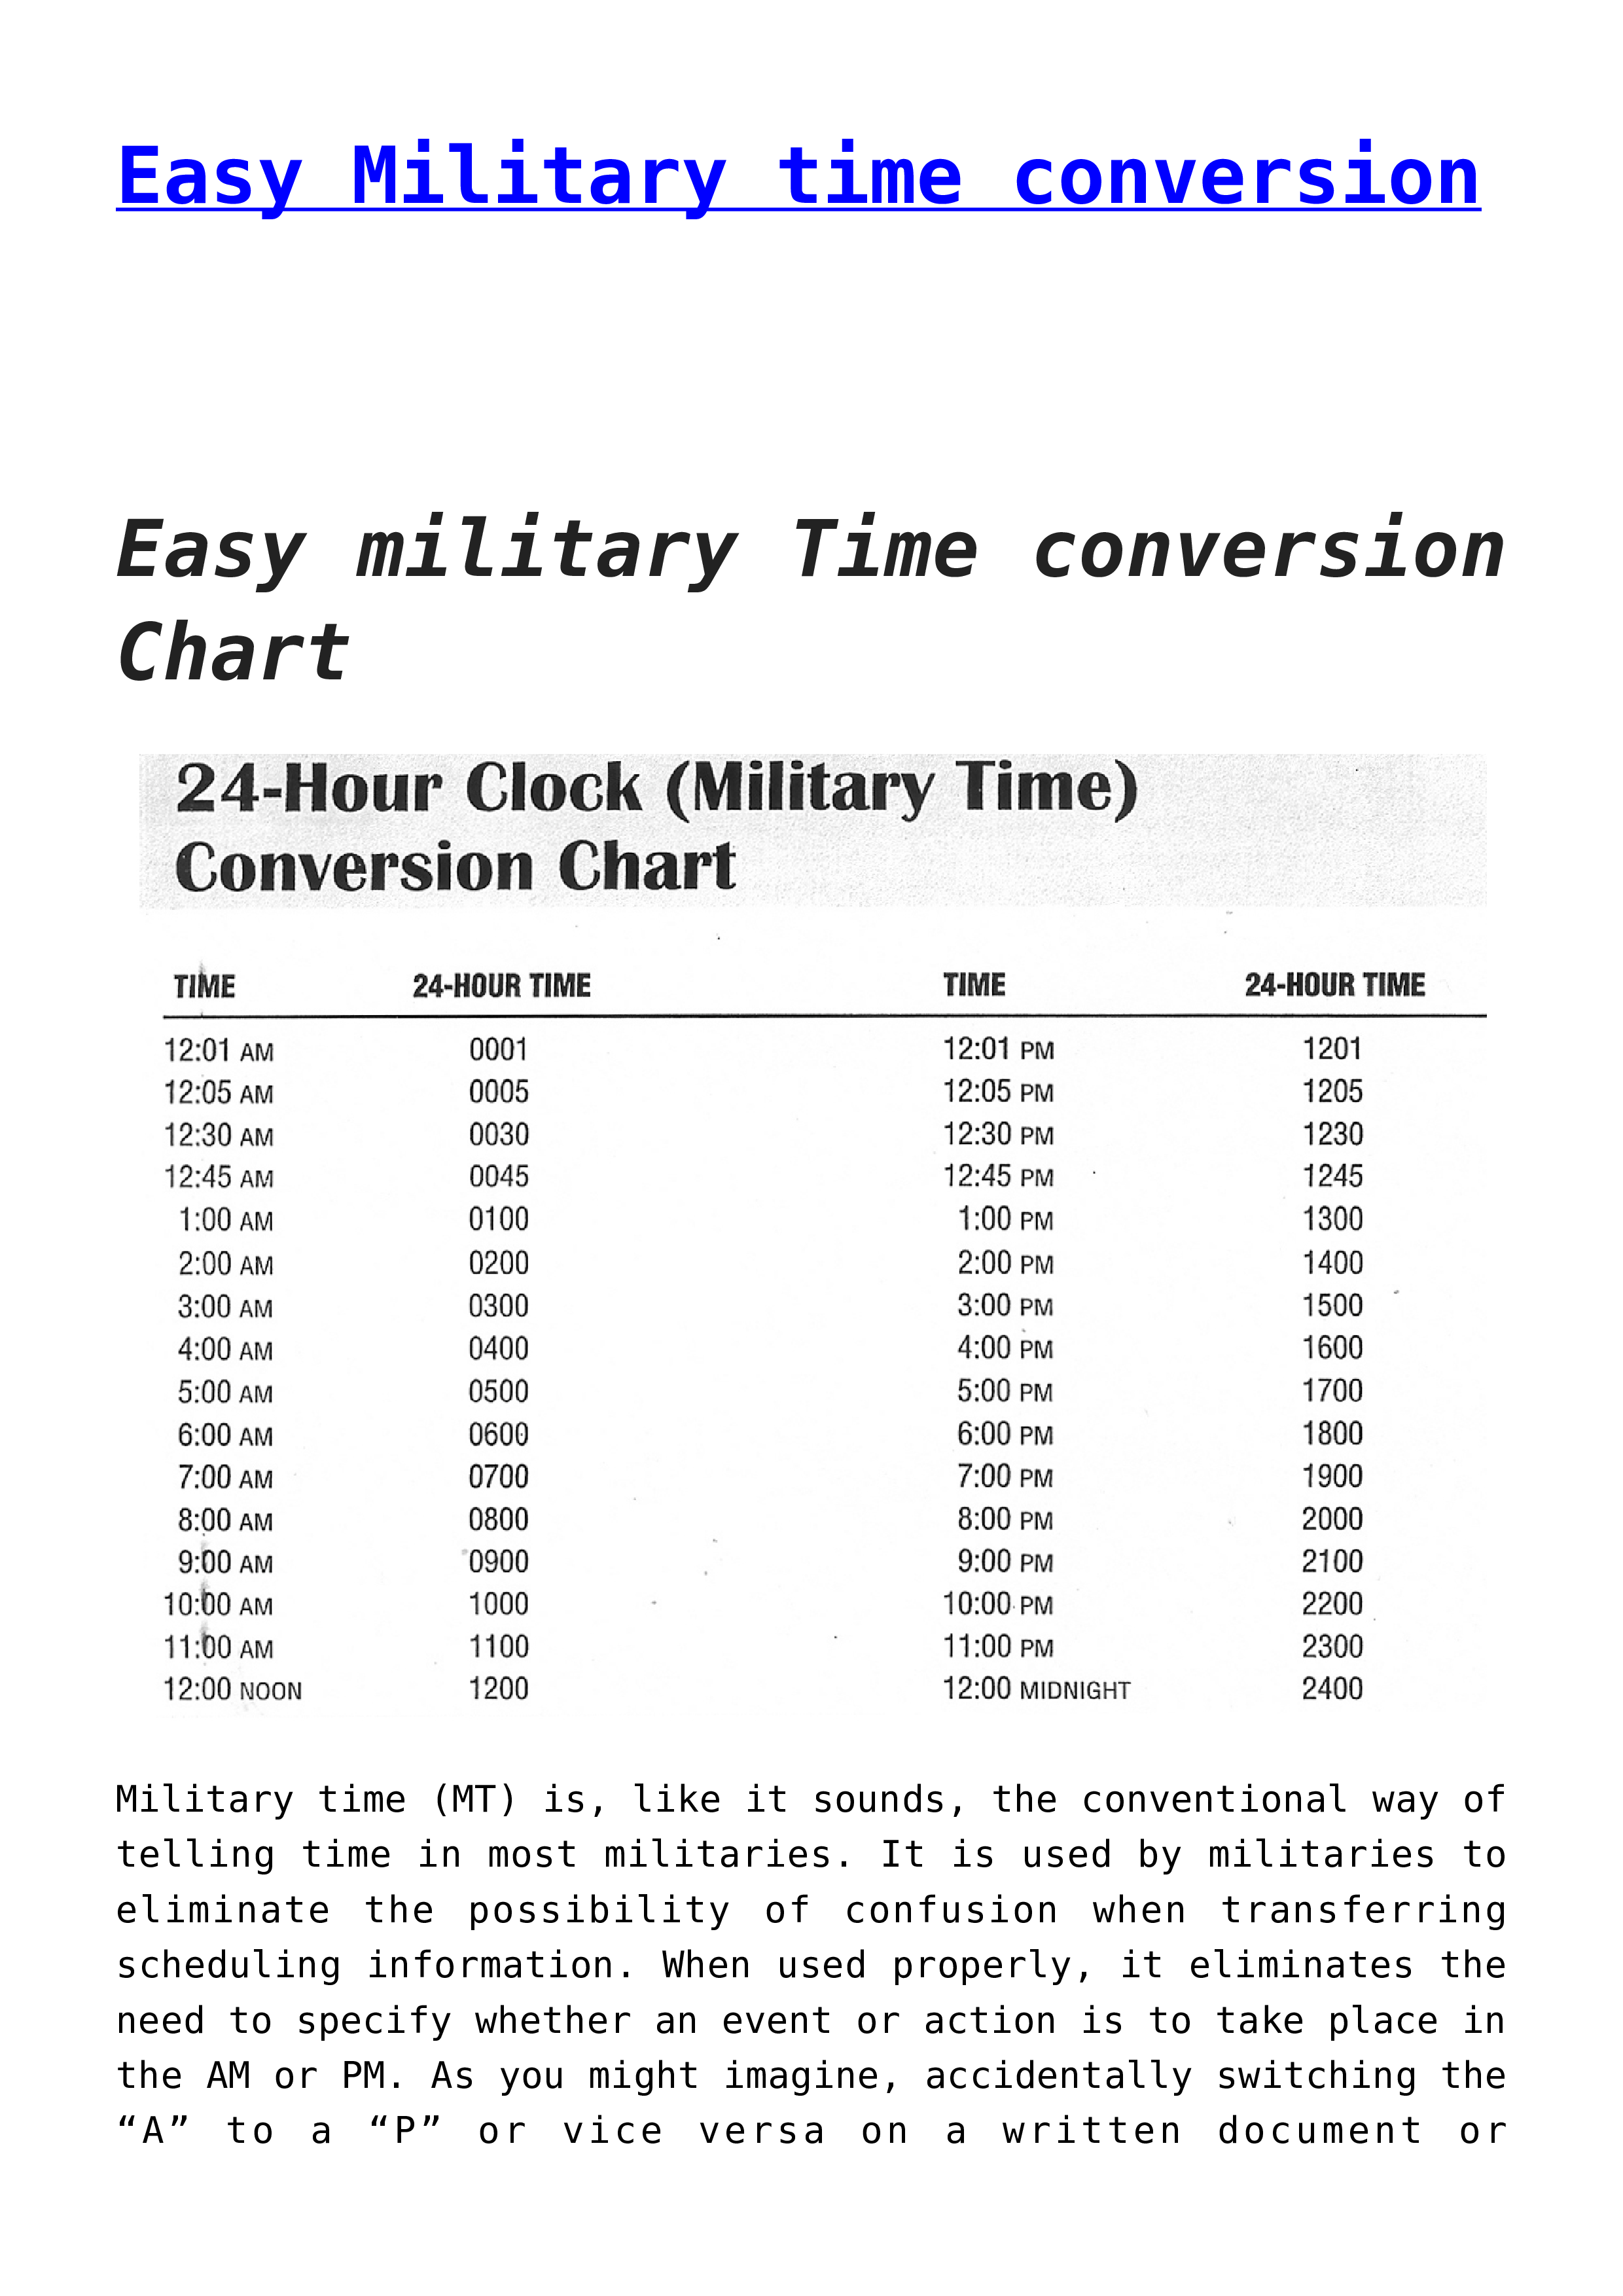 easy-military-time-conversion-chart-templates-at-allbusinesstemplates